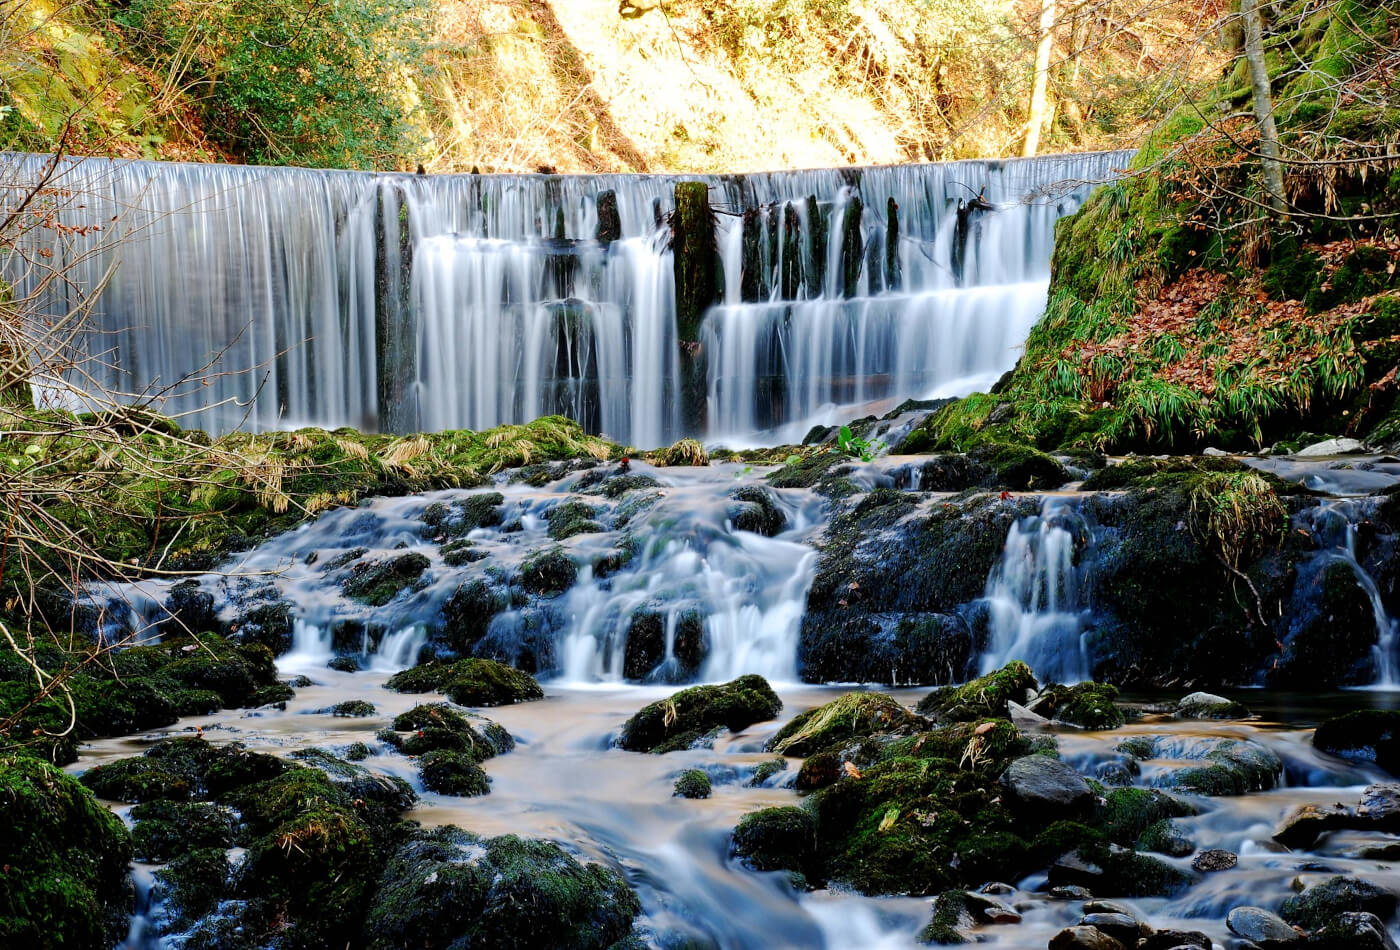 A series of small waterfalls flowing downstream at Stanley Ghyll Force